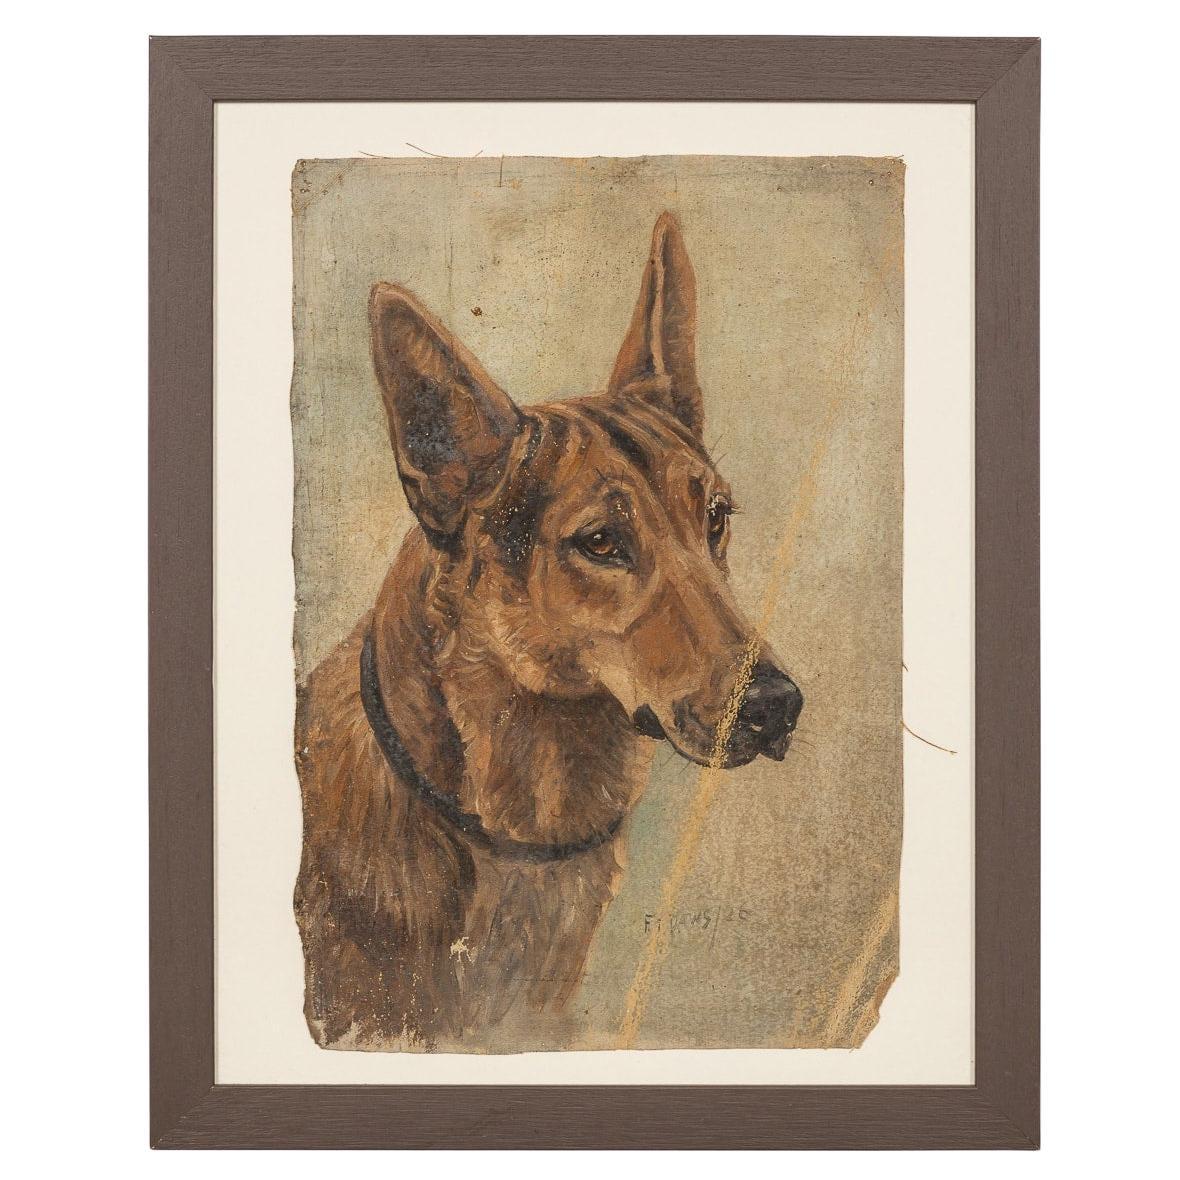 Antique 20thC Framed German Shepherd Oil On Canvas By Frederick T. Daws c.1926